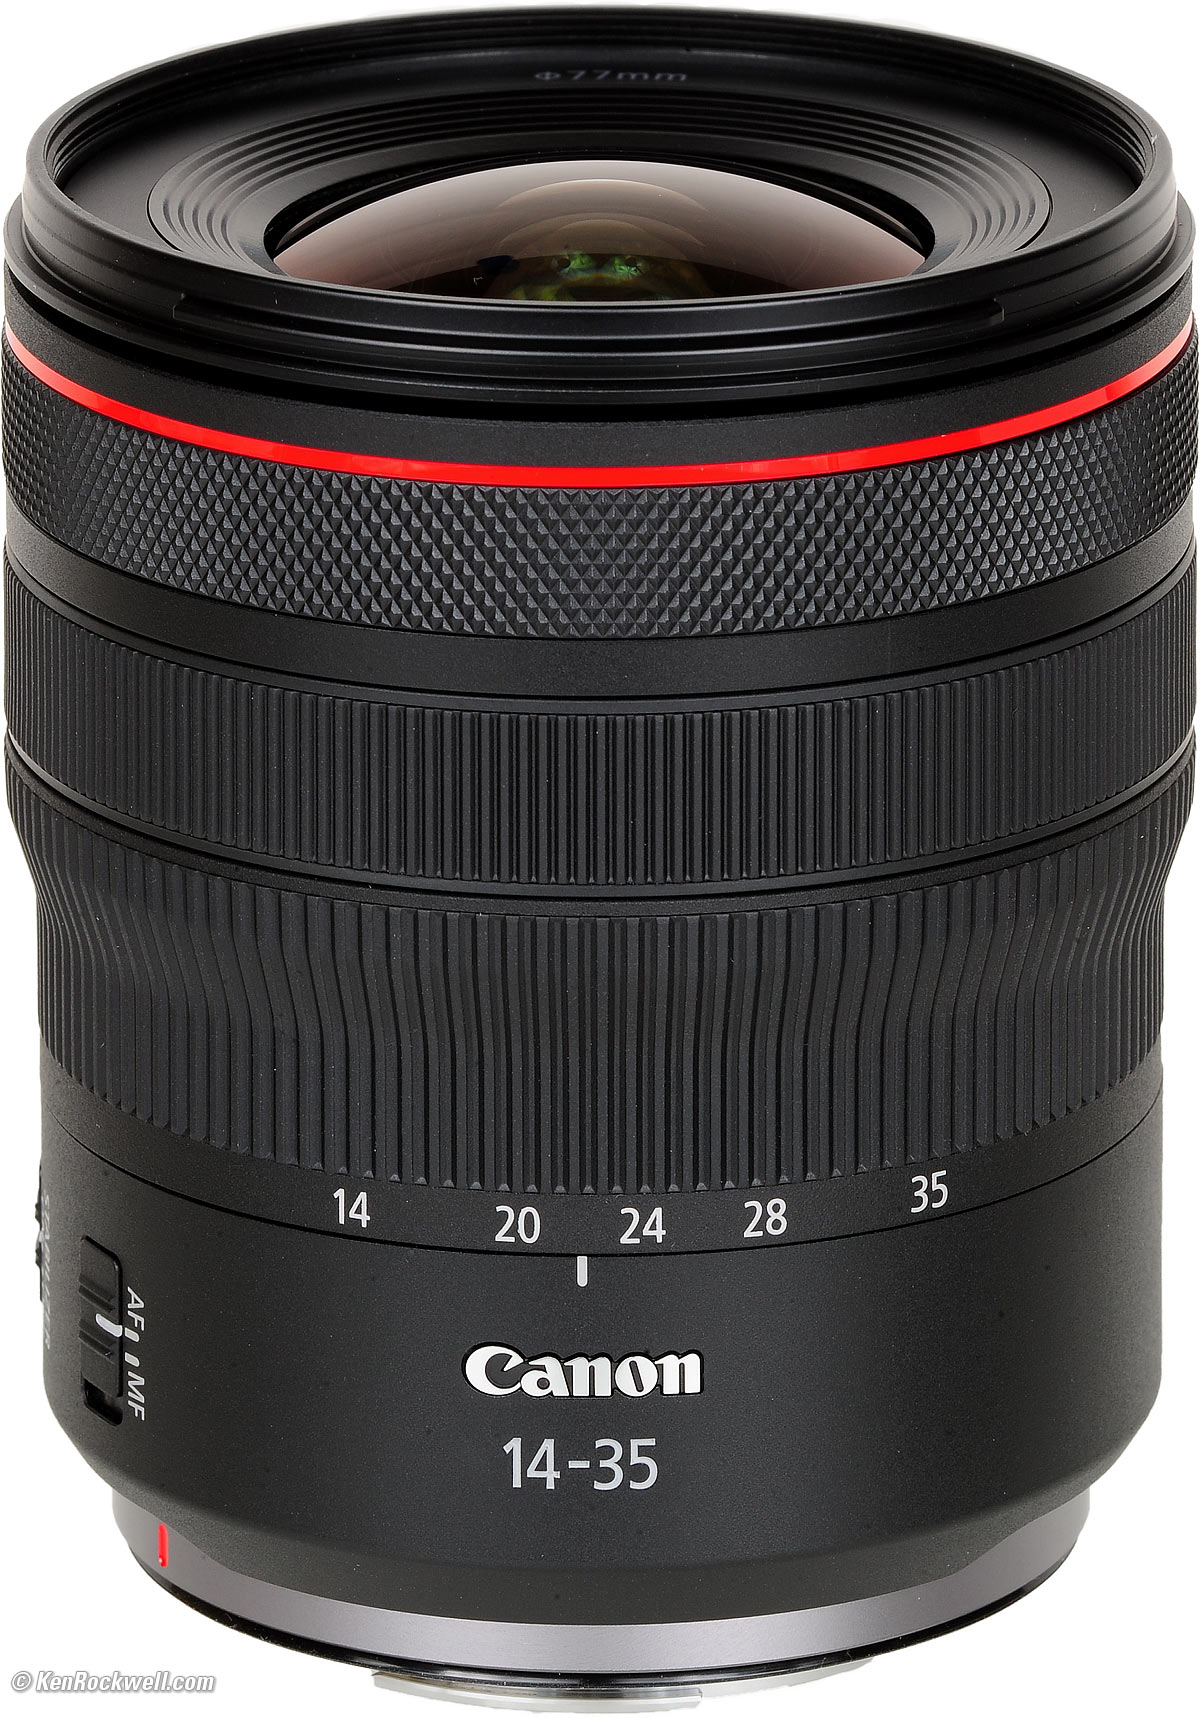 Canon RF 14-35mm f/4L IS